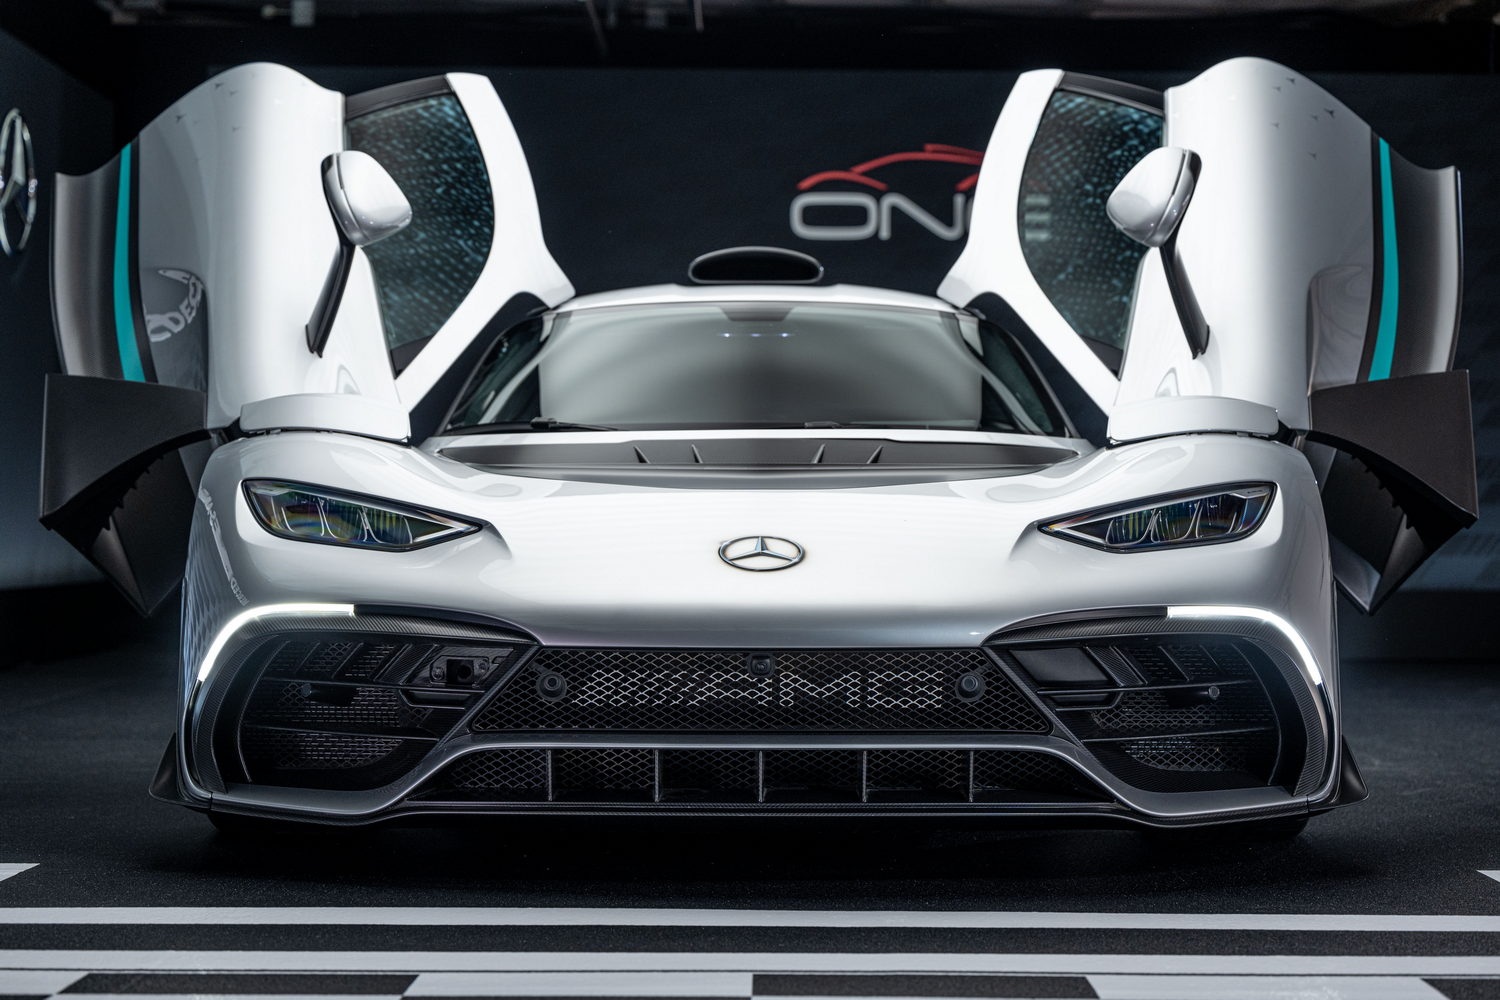 Mercedes-AMG One is a 1,063hp F1-inspired hybrid